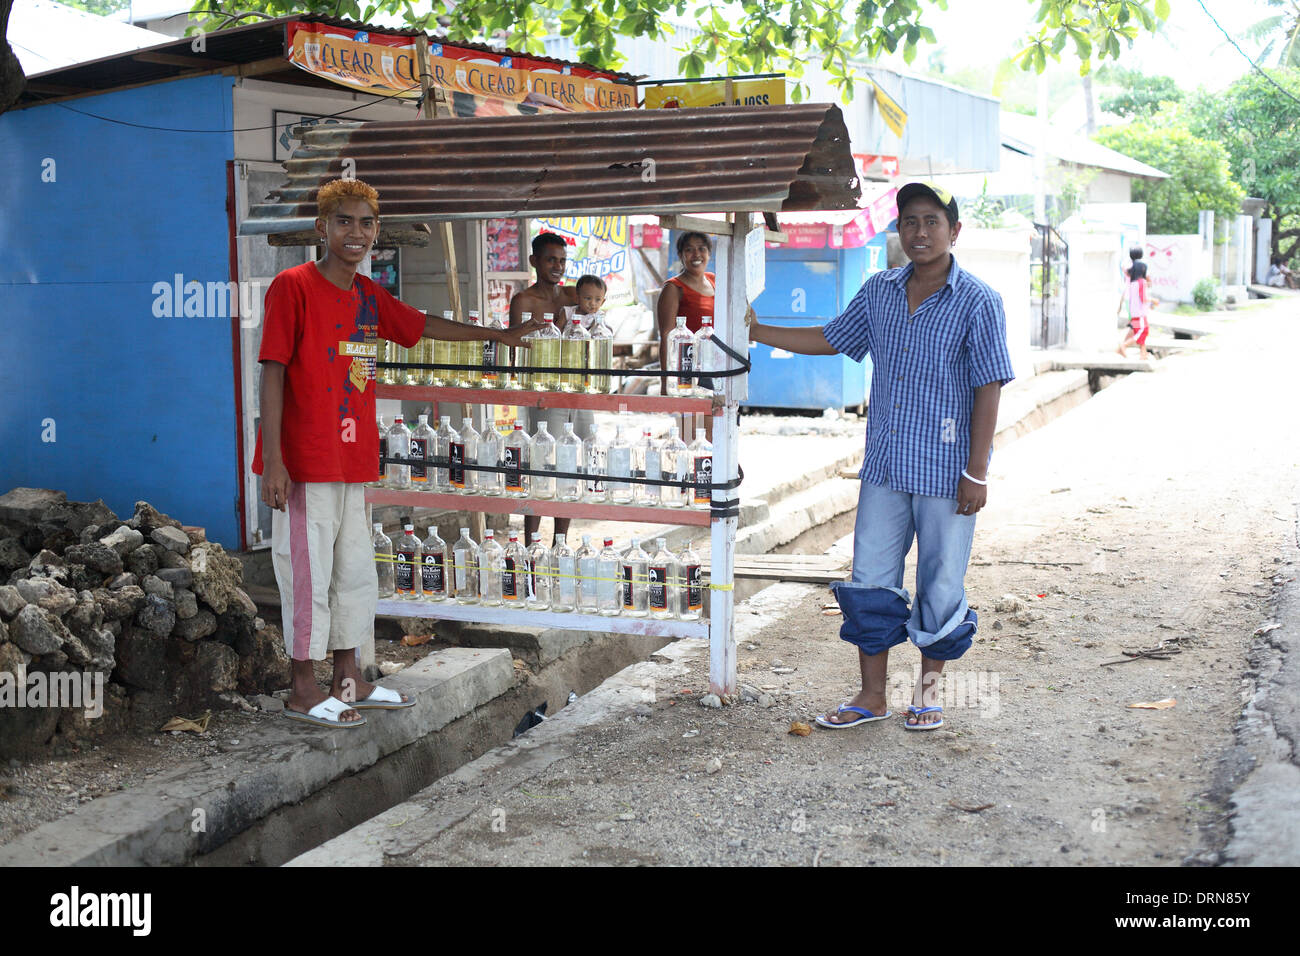 Smiling young men sell gasoline / petrol in bottles along the side of the road. Kupang, West Timor, Indonesia Stock Photo